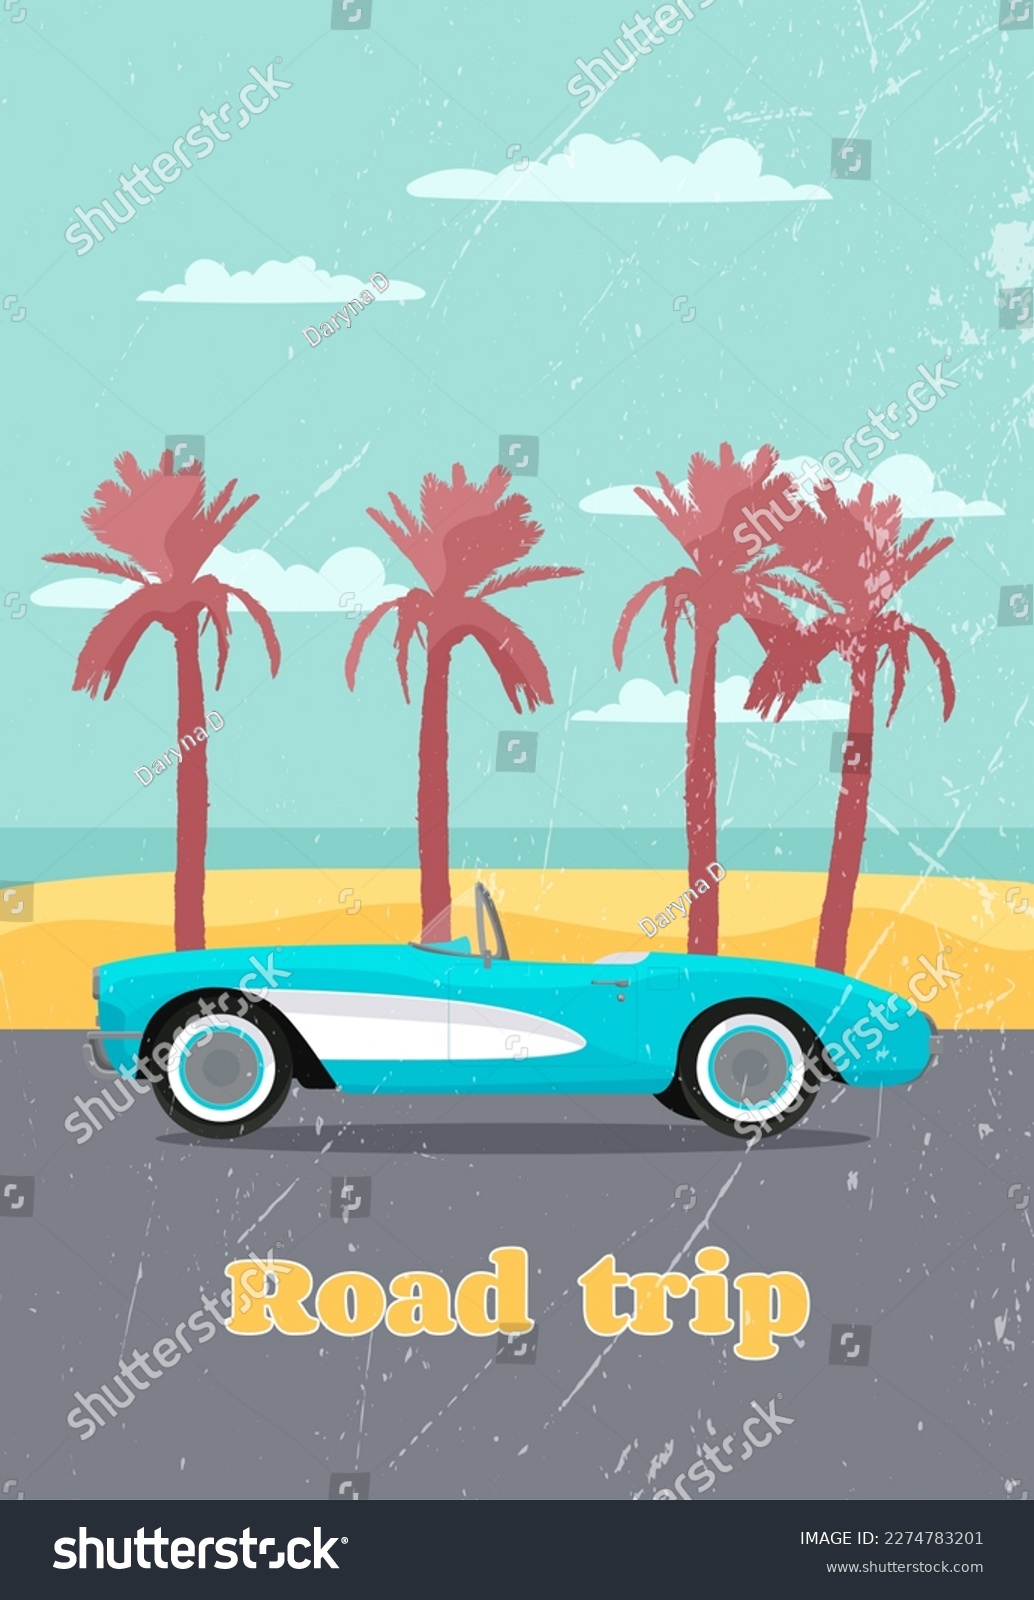 SVG of Classic corvette car around palms and ocean. Summer road trip poster in retro style. Vector illustration svg